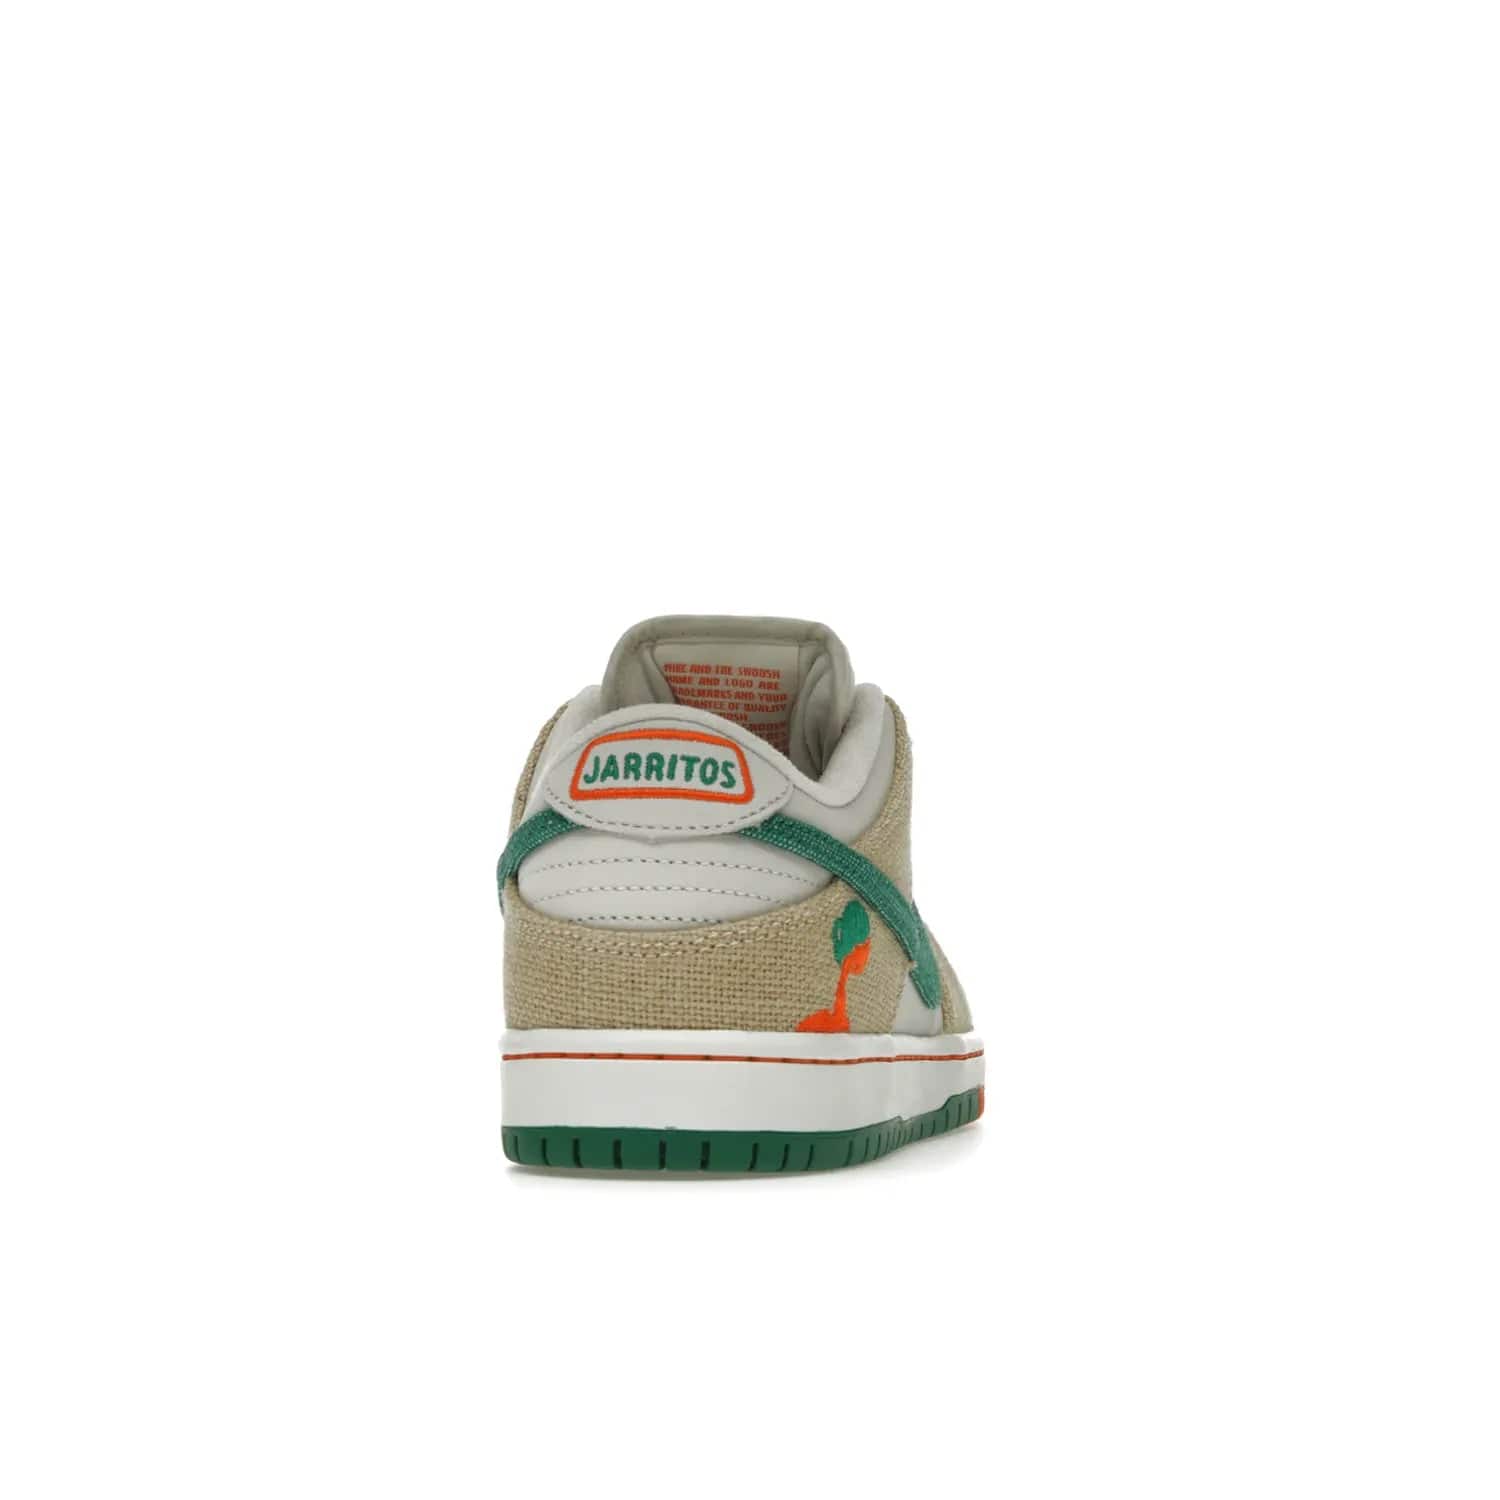 Nike SB Dunk Low Jarritos - Image 29 - Only at www.BallersClubKickz.com - Shop limited edition Nike SB Dunk Low Jarritos! Crafted with white leather and tear-away canvas materials with green accents. Includes orange, green, and white laces to customize your look. Available now.